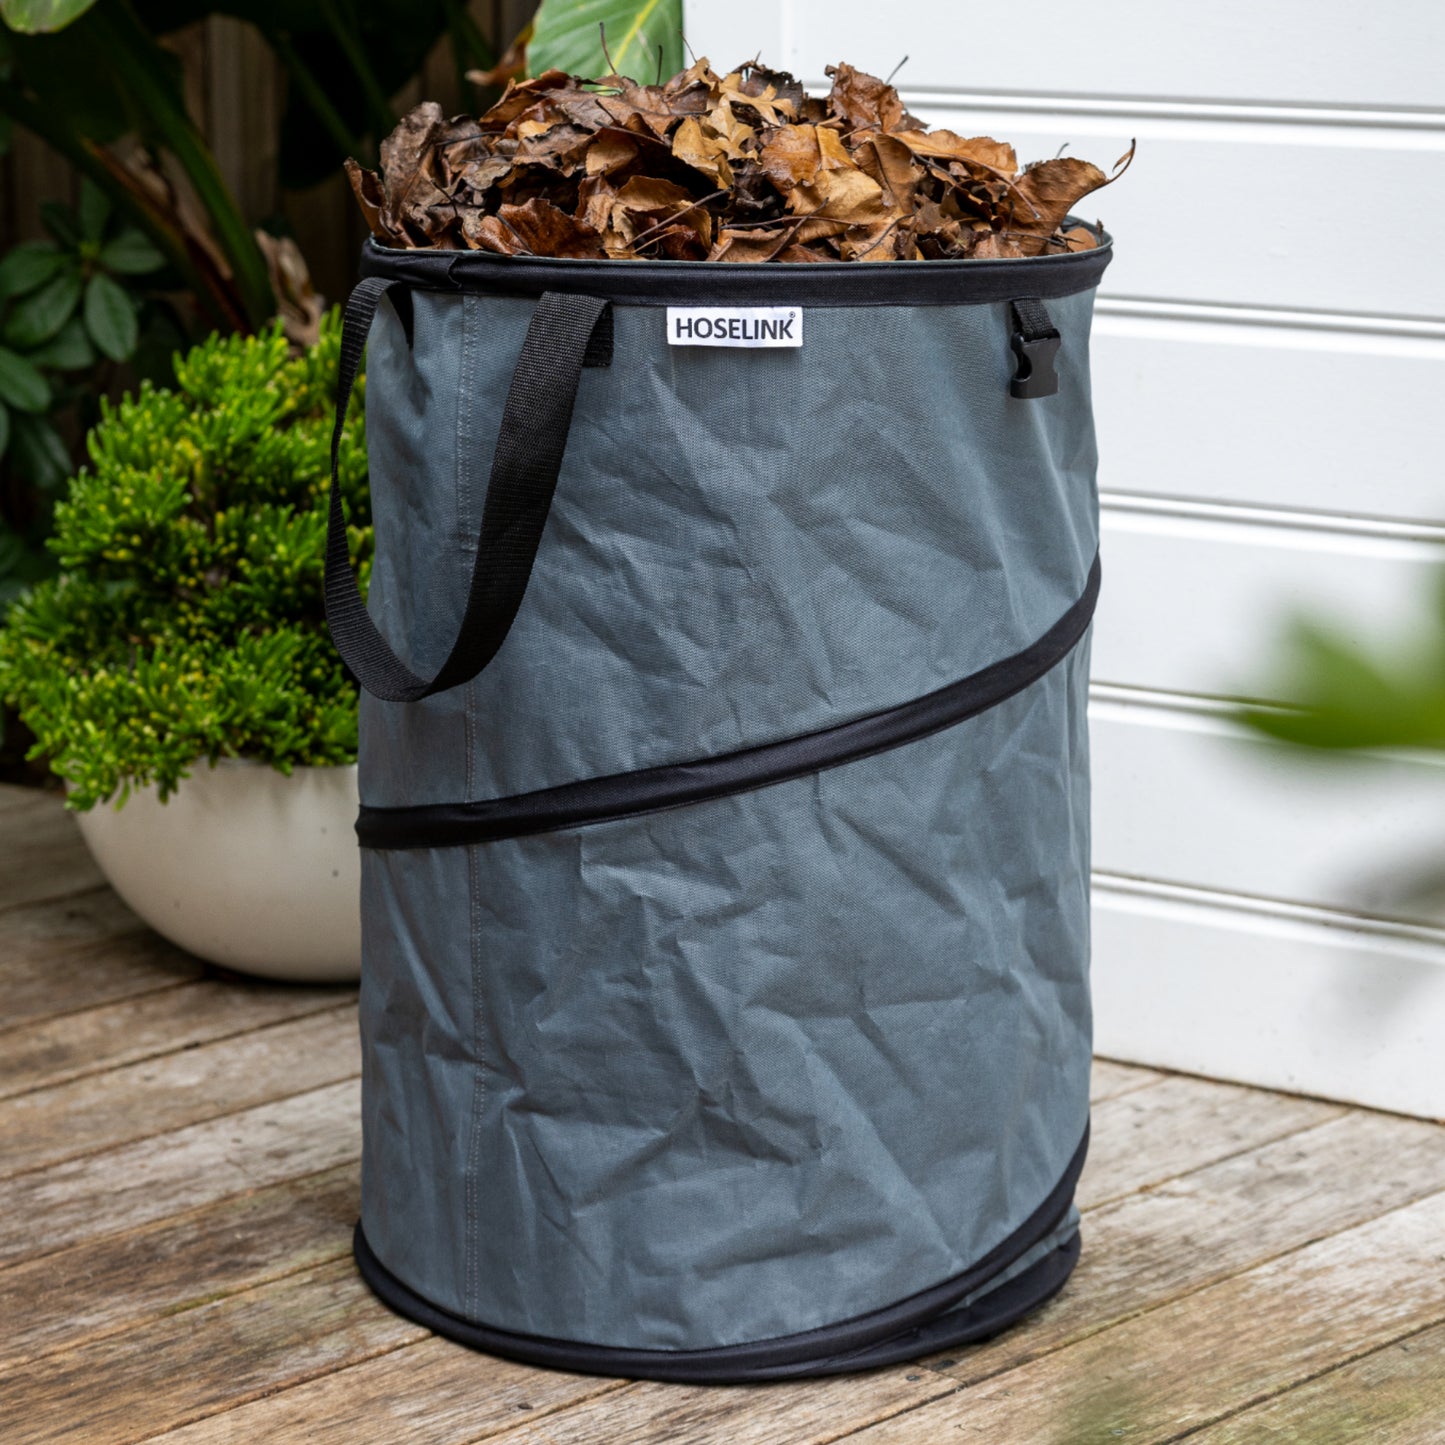 Charcoal coloured Pop up Waste Bag full of brown leaves sitting on a wooden deck